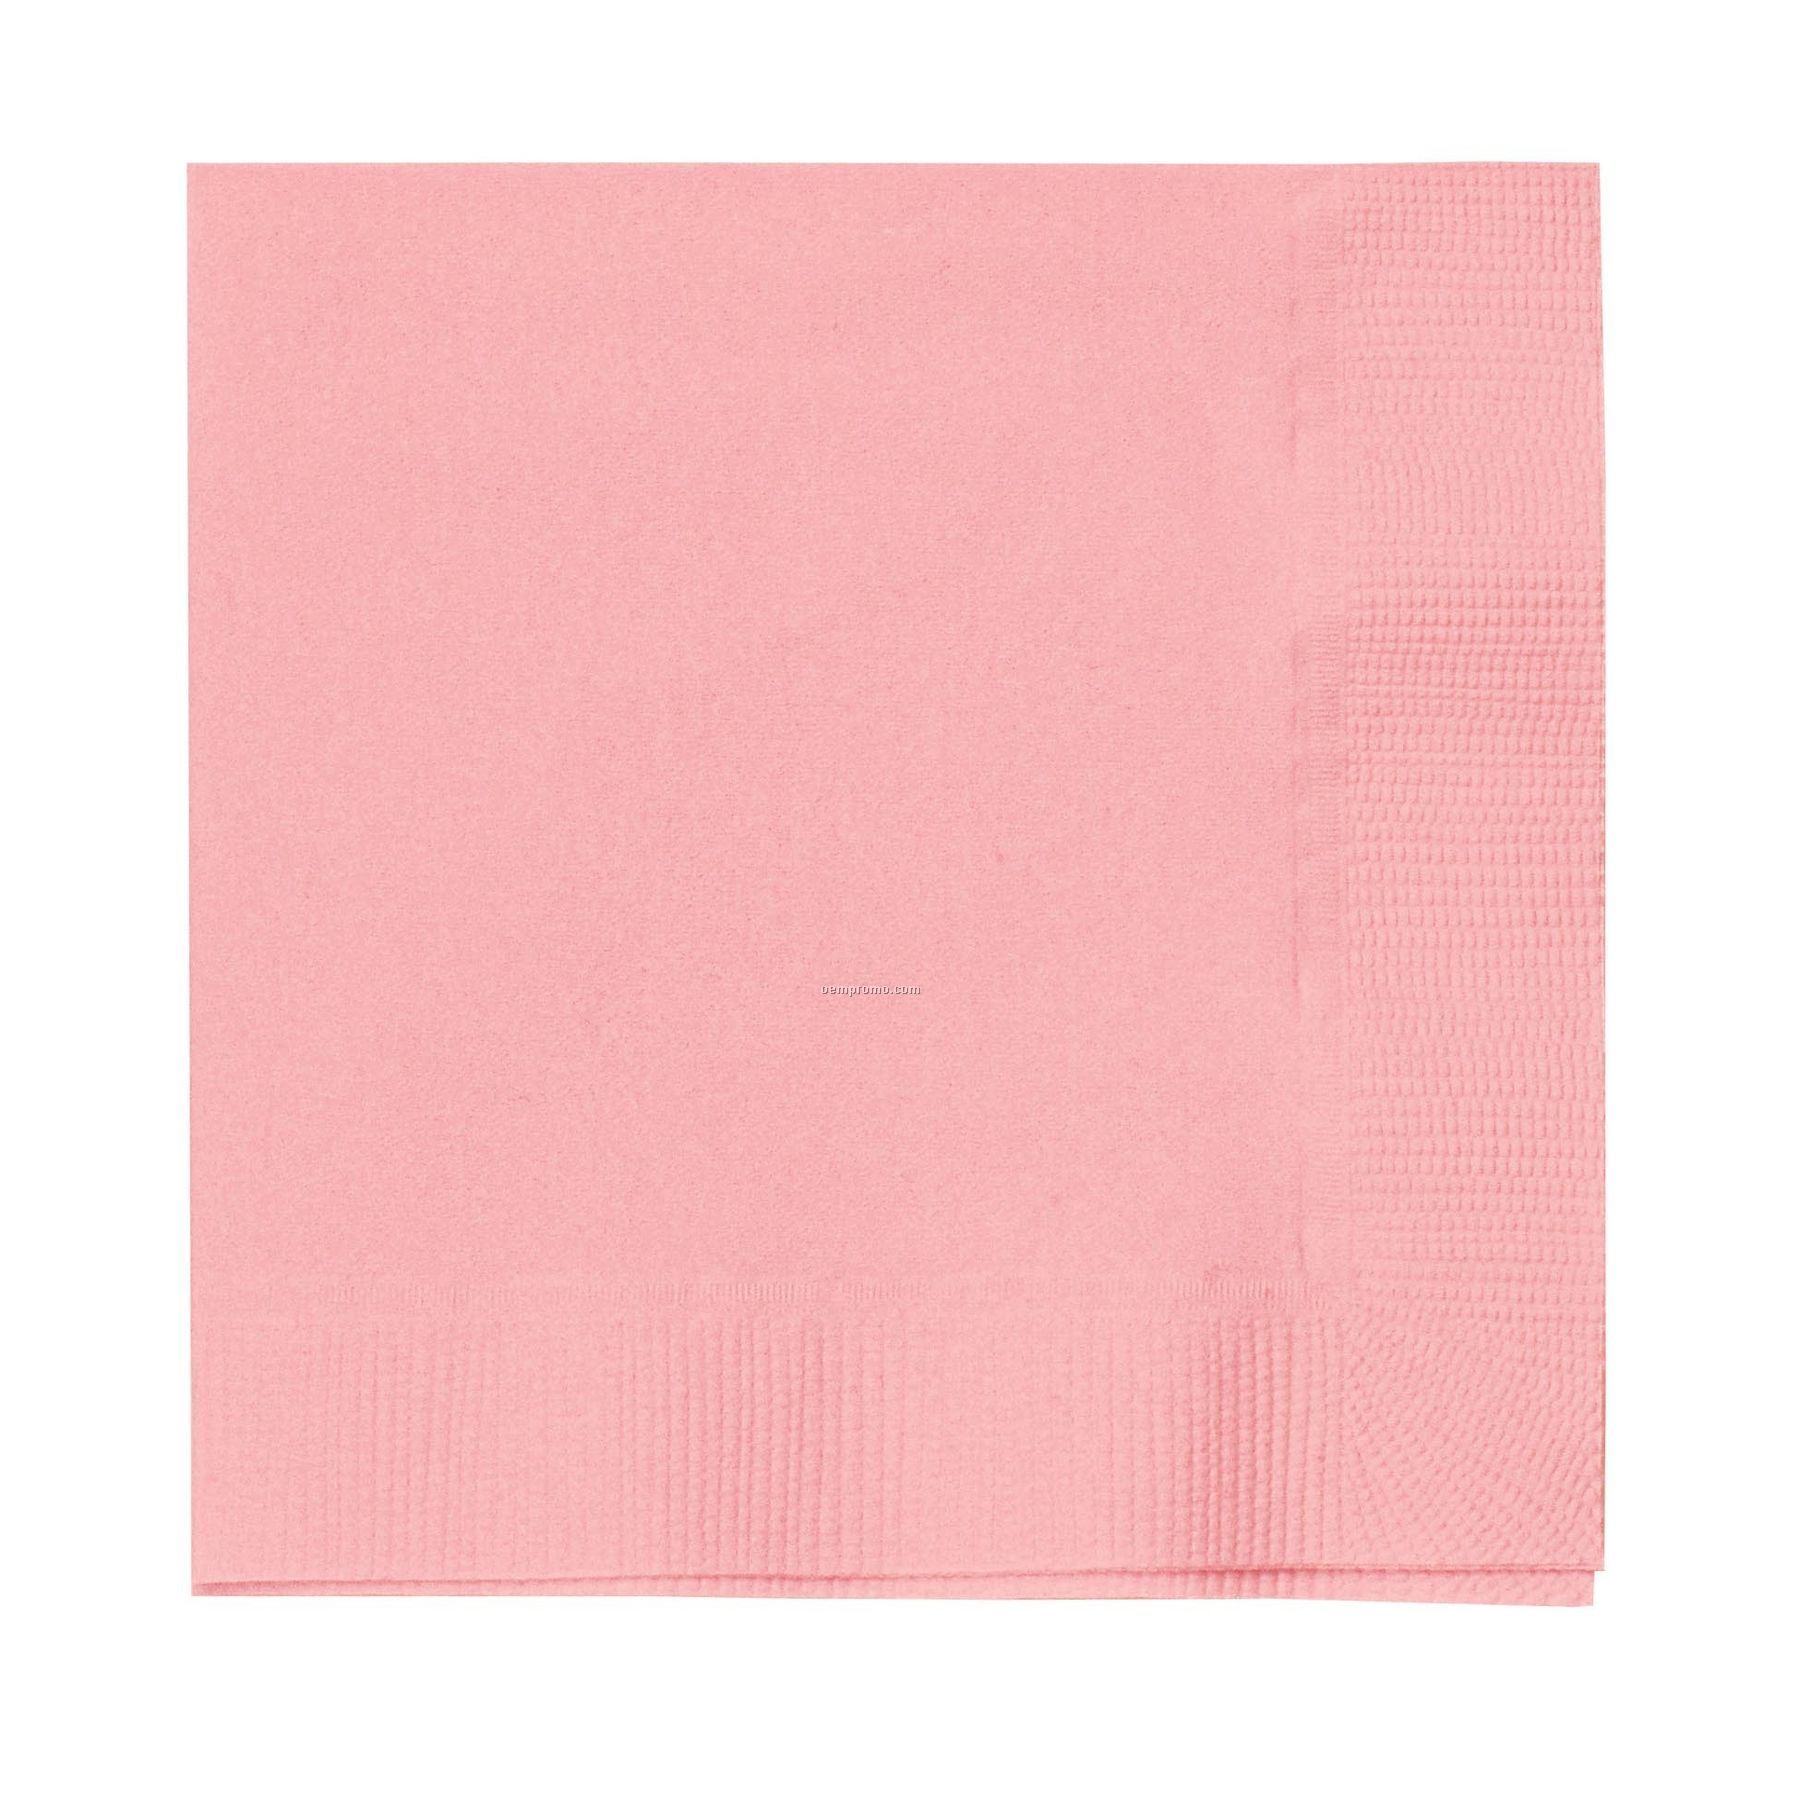 Colorware Classic Pink Dinner Napkins With 1/4 Fold